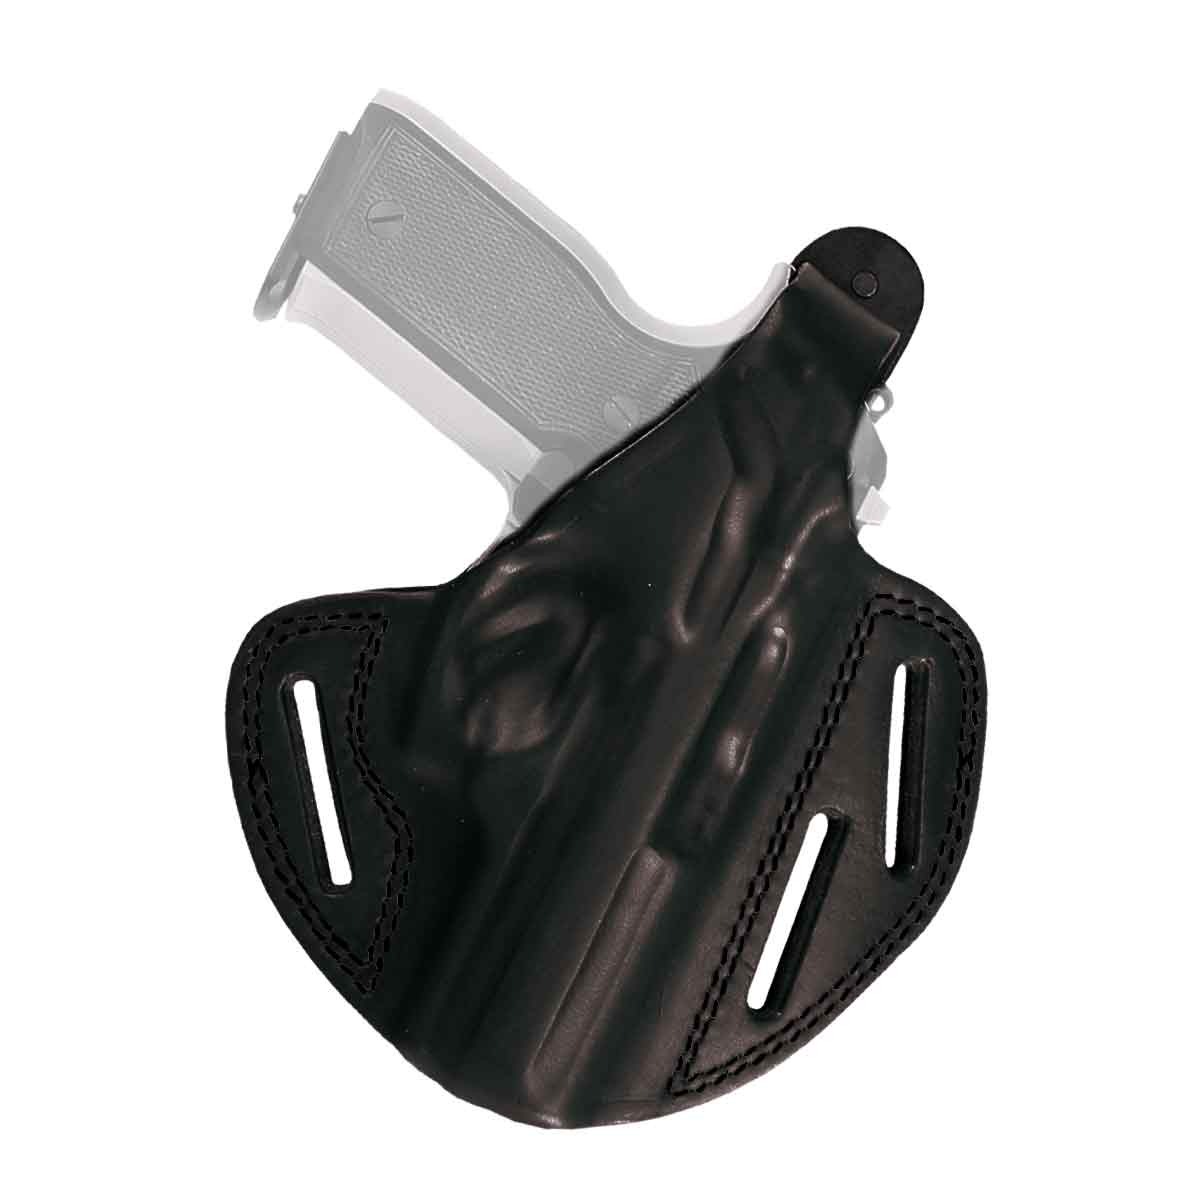 Pancake holster with two carrying positions CZ 83-Black-Left